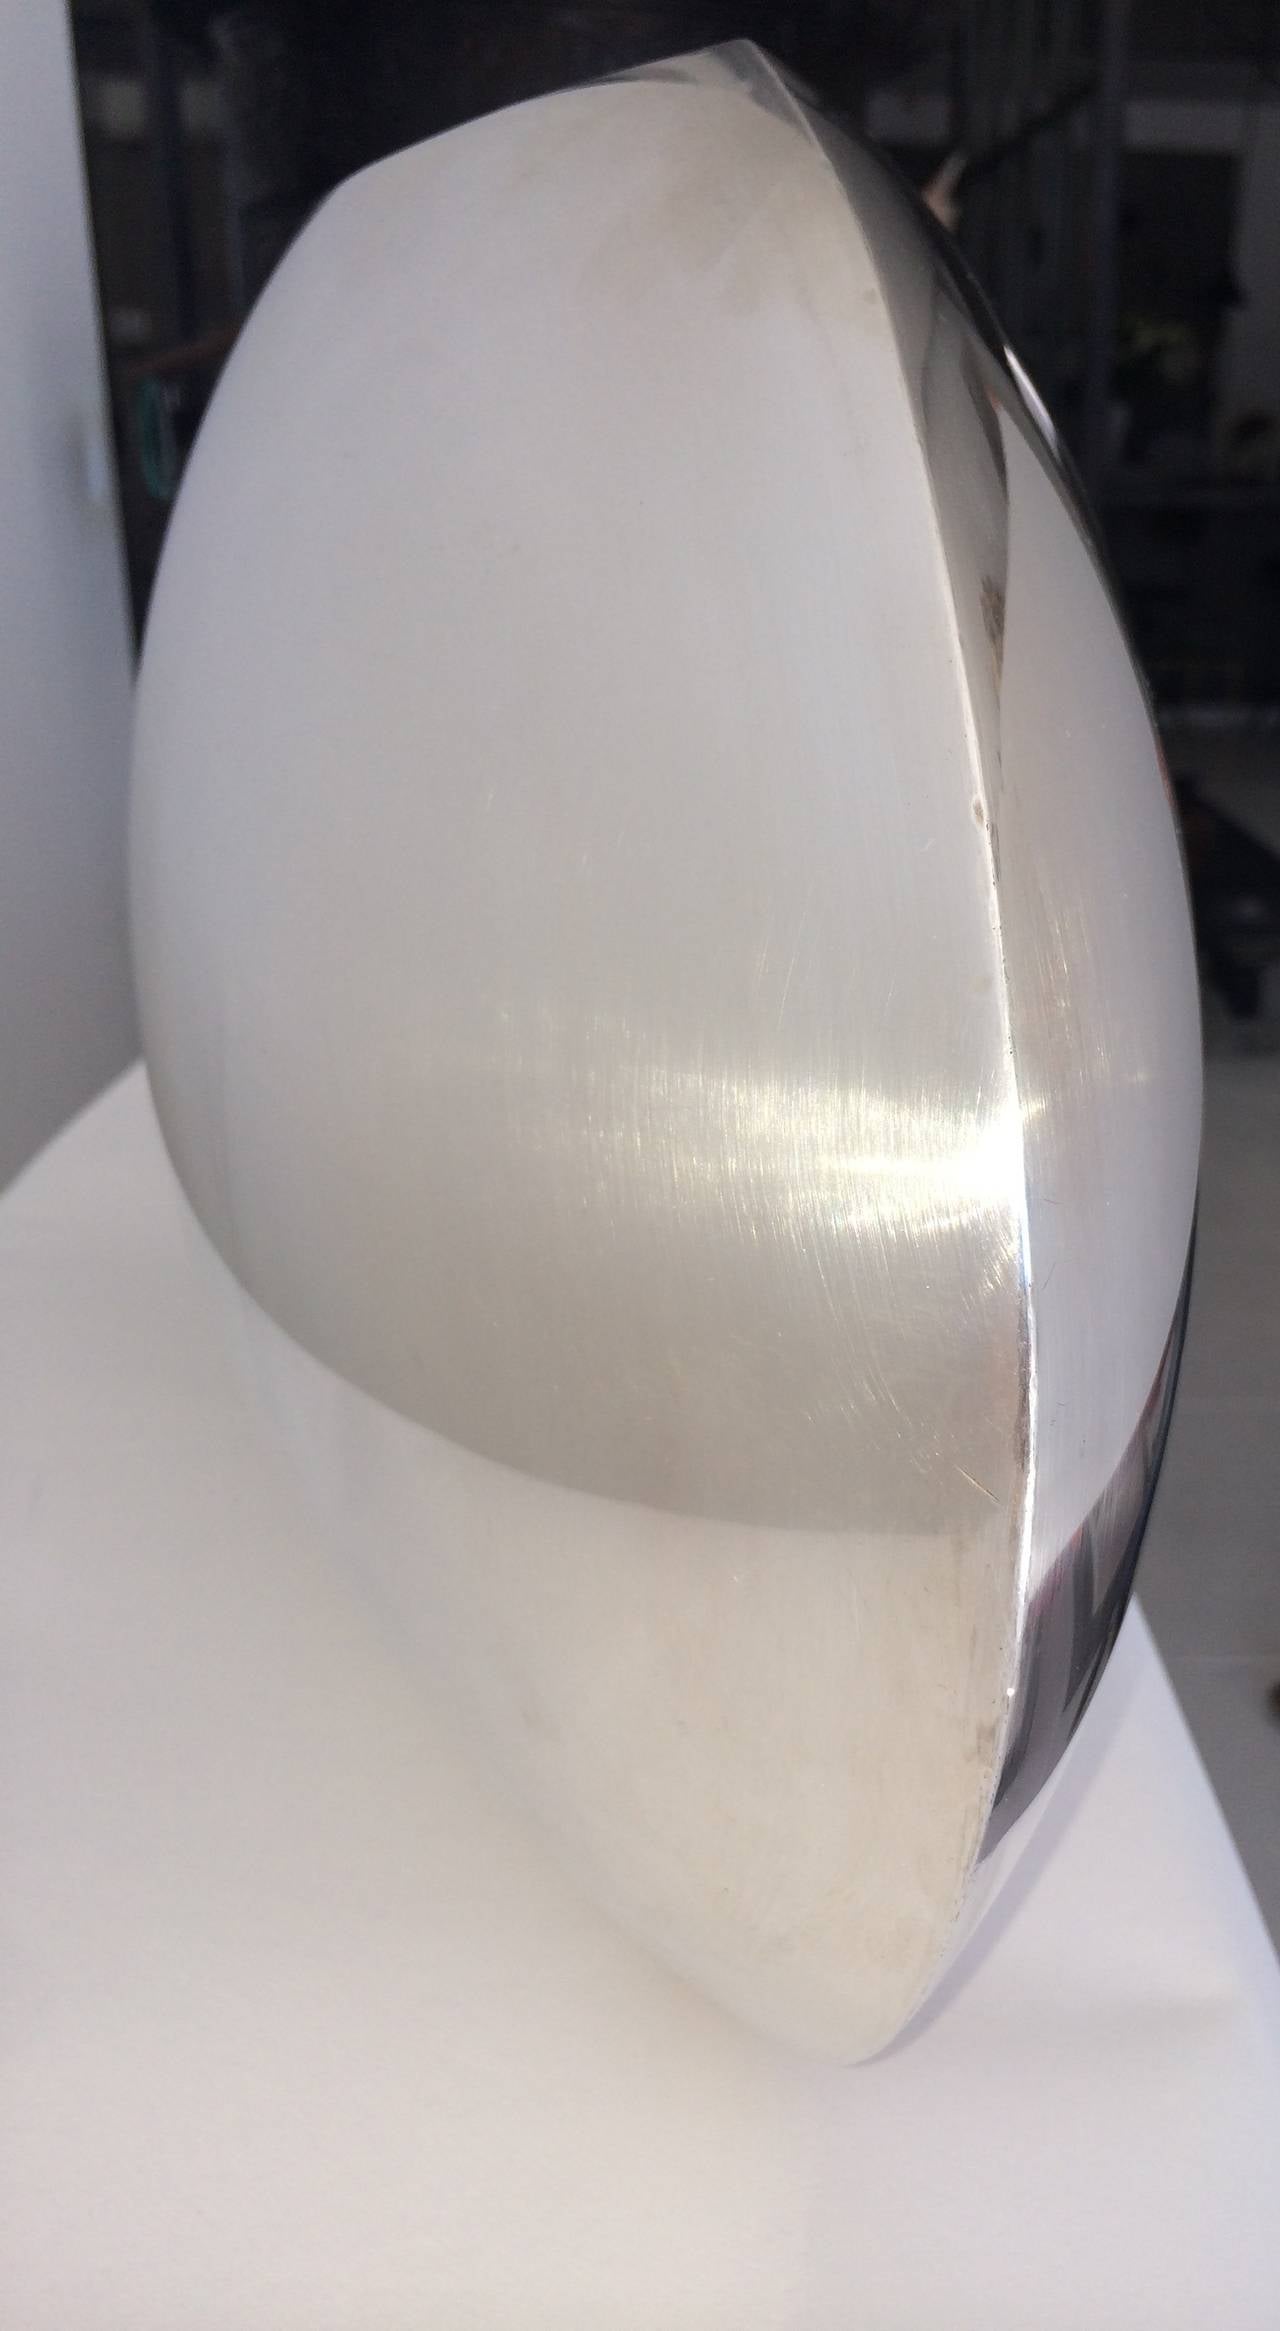 Silver Plated Nickel Vase by Sabattini 1970s at 1stdibs